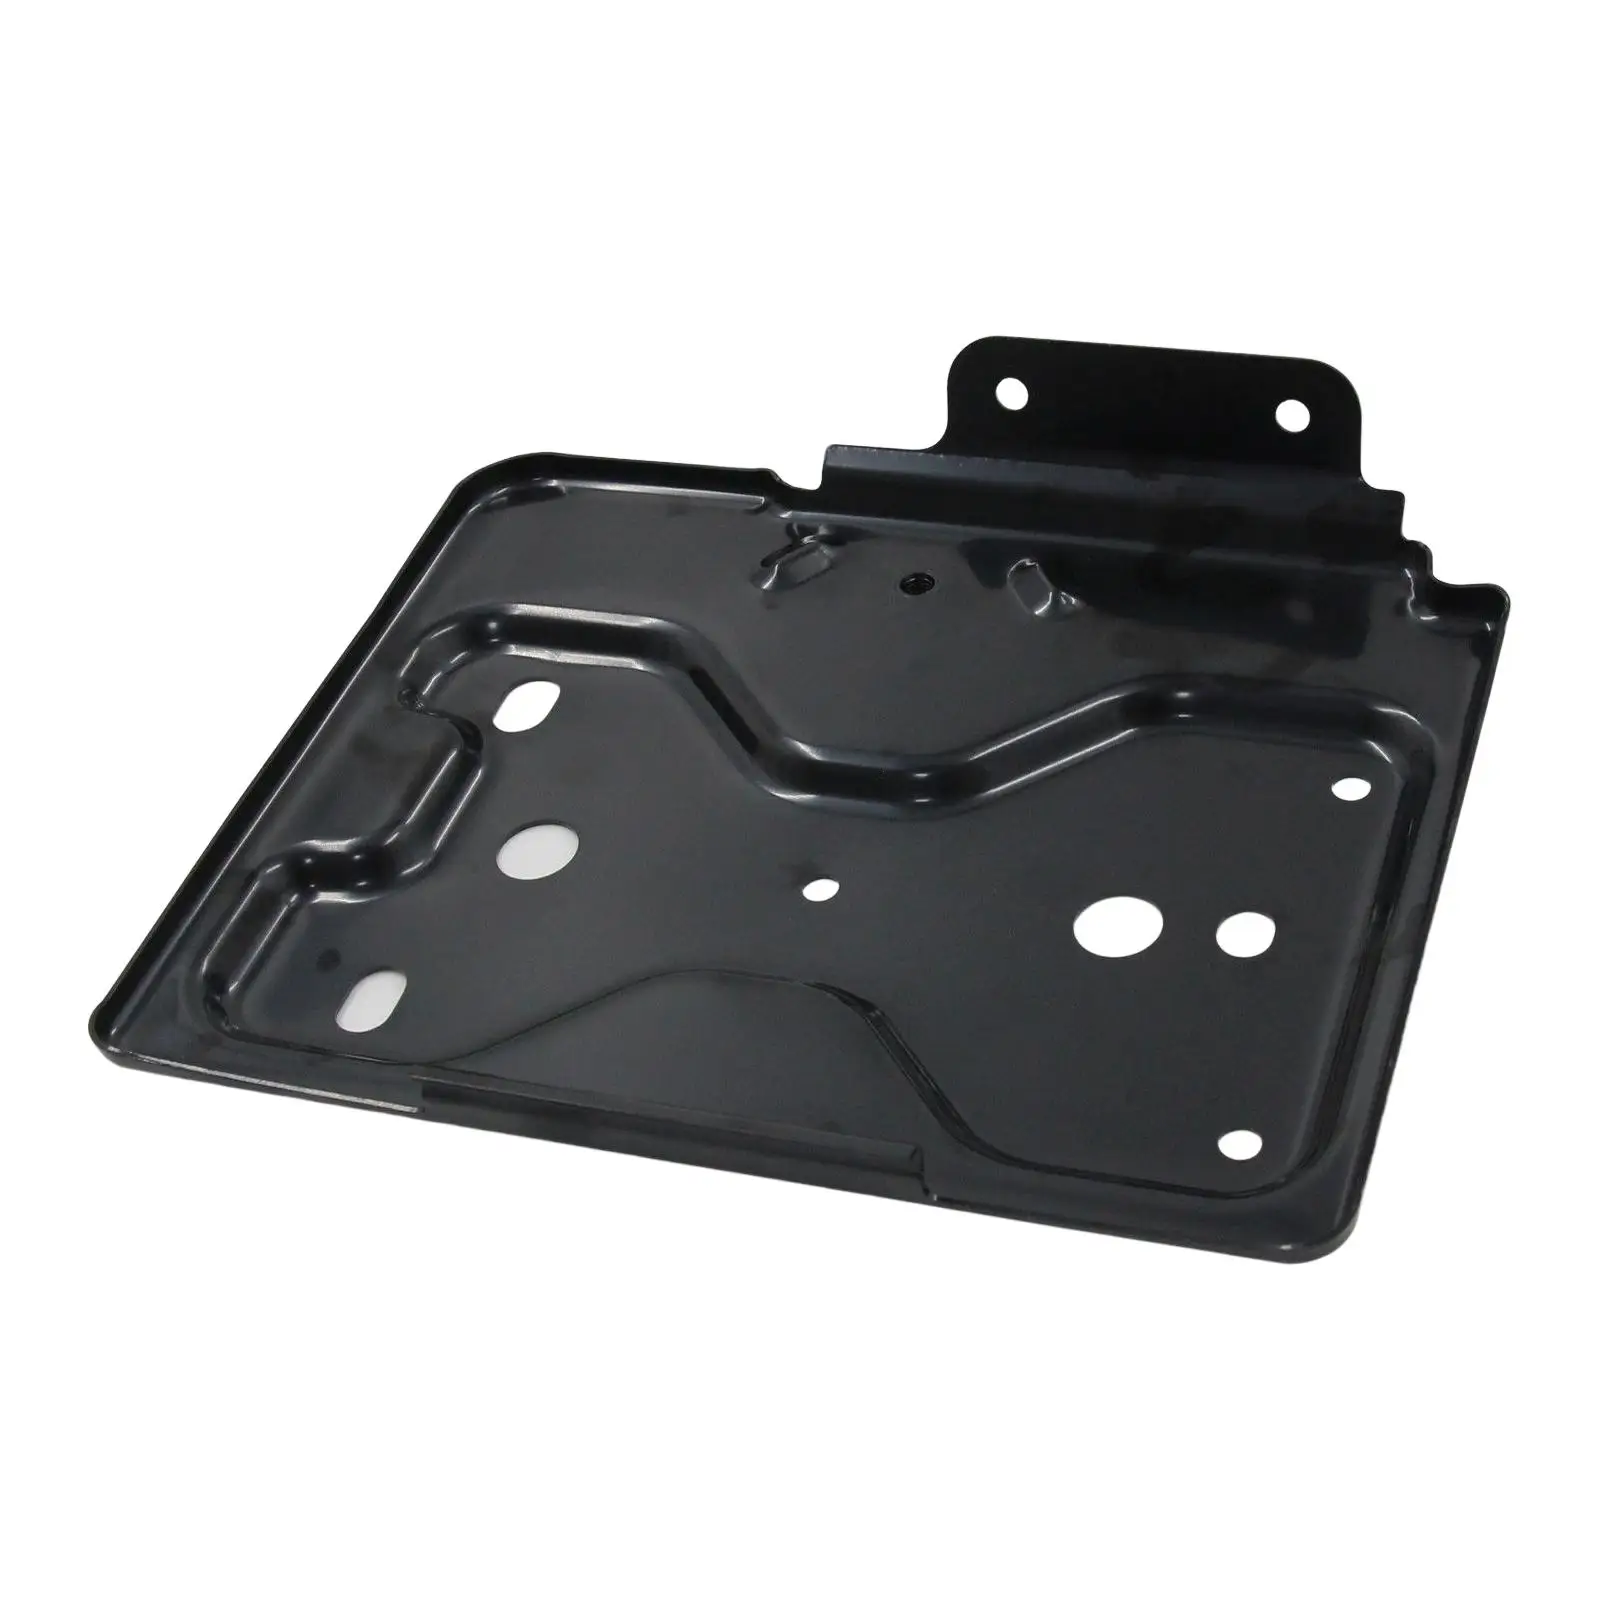 Driver Side Battery Tray High Performance Easy to Install Premium Spare Parts Car Accessories for Chevrolet Silverado 1500